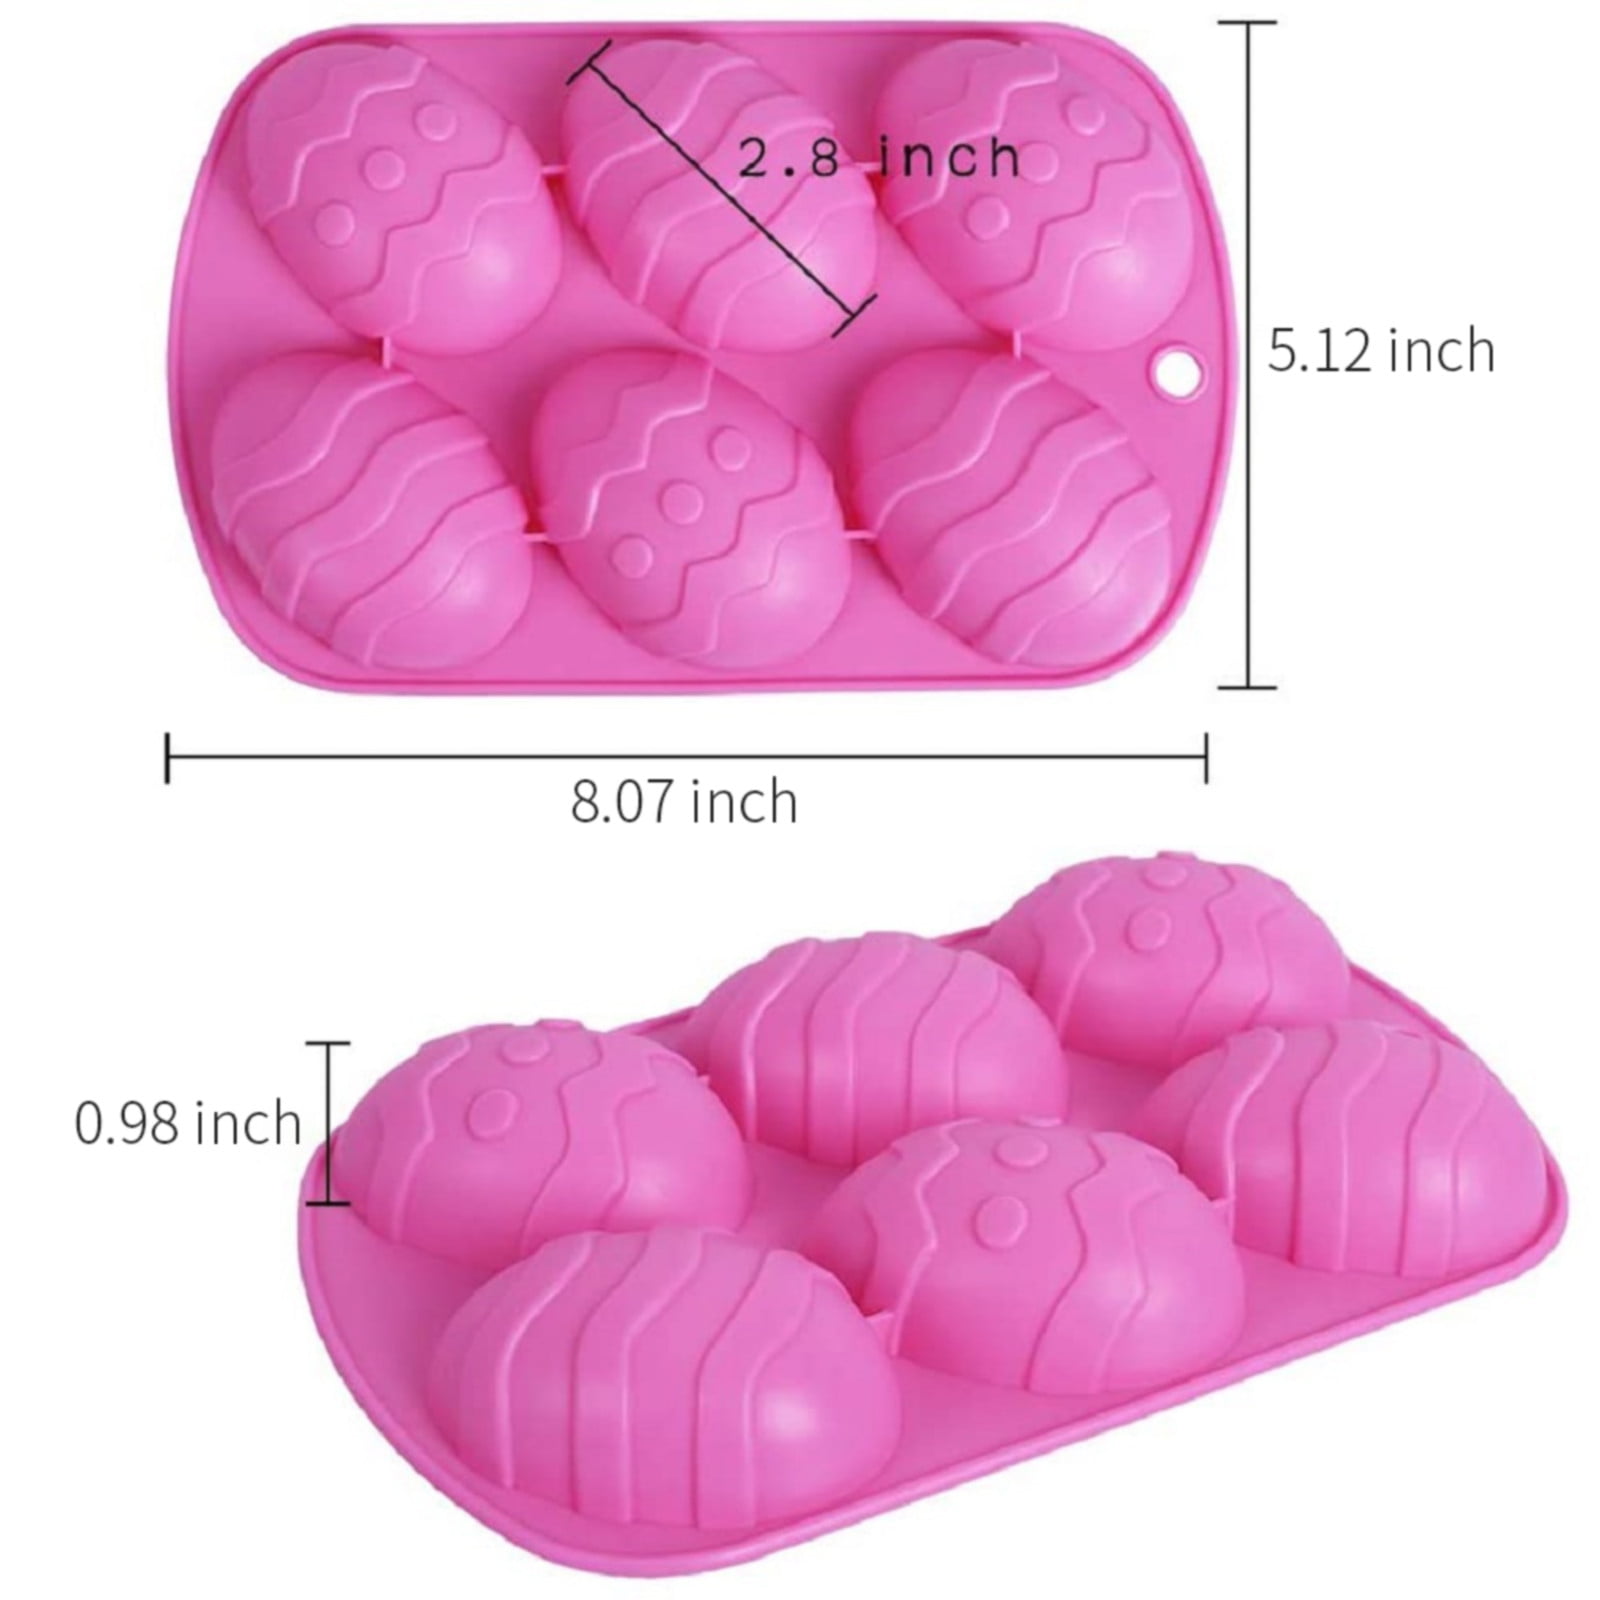 Pinkiemold Egg Tray Mold Silicone Mold Cement Mold Egg Tray Die